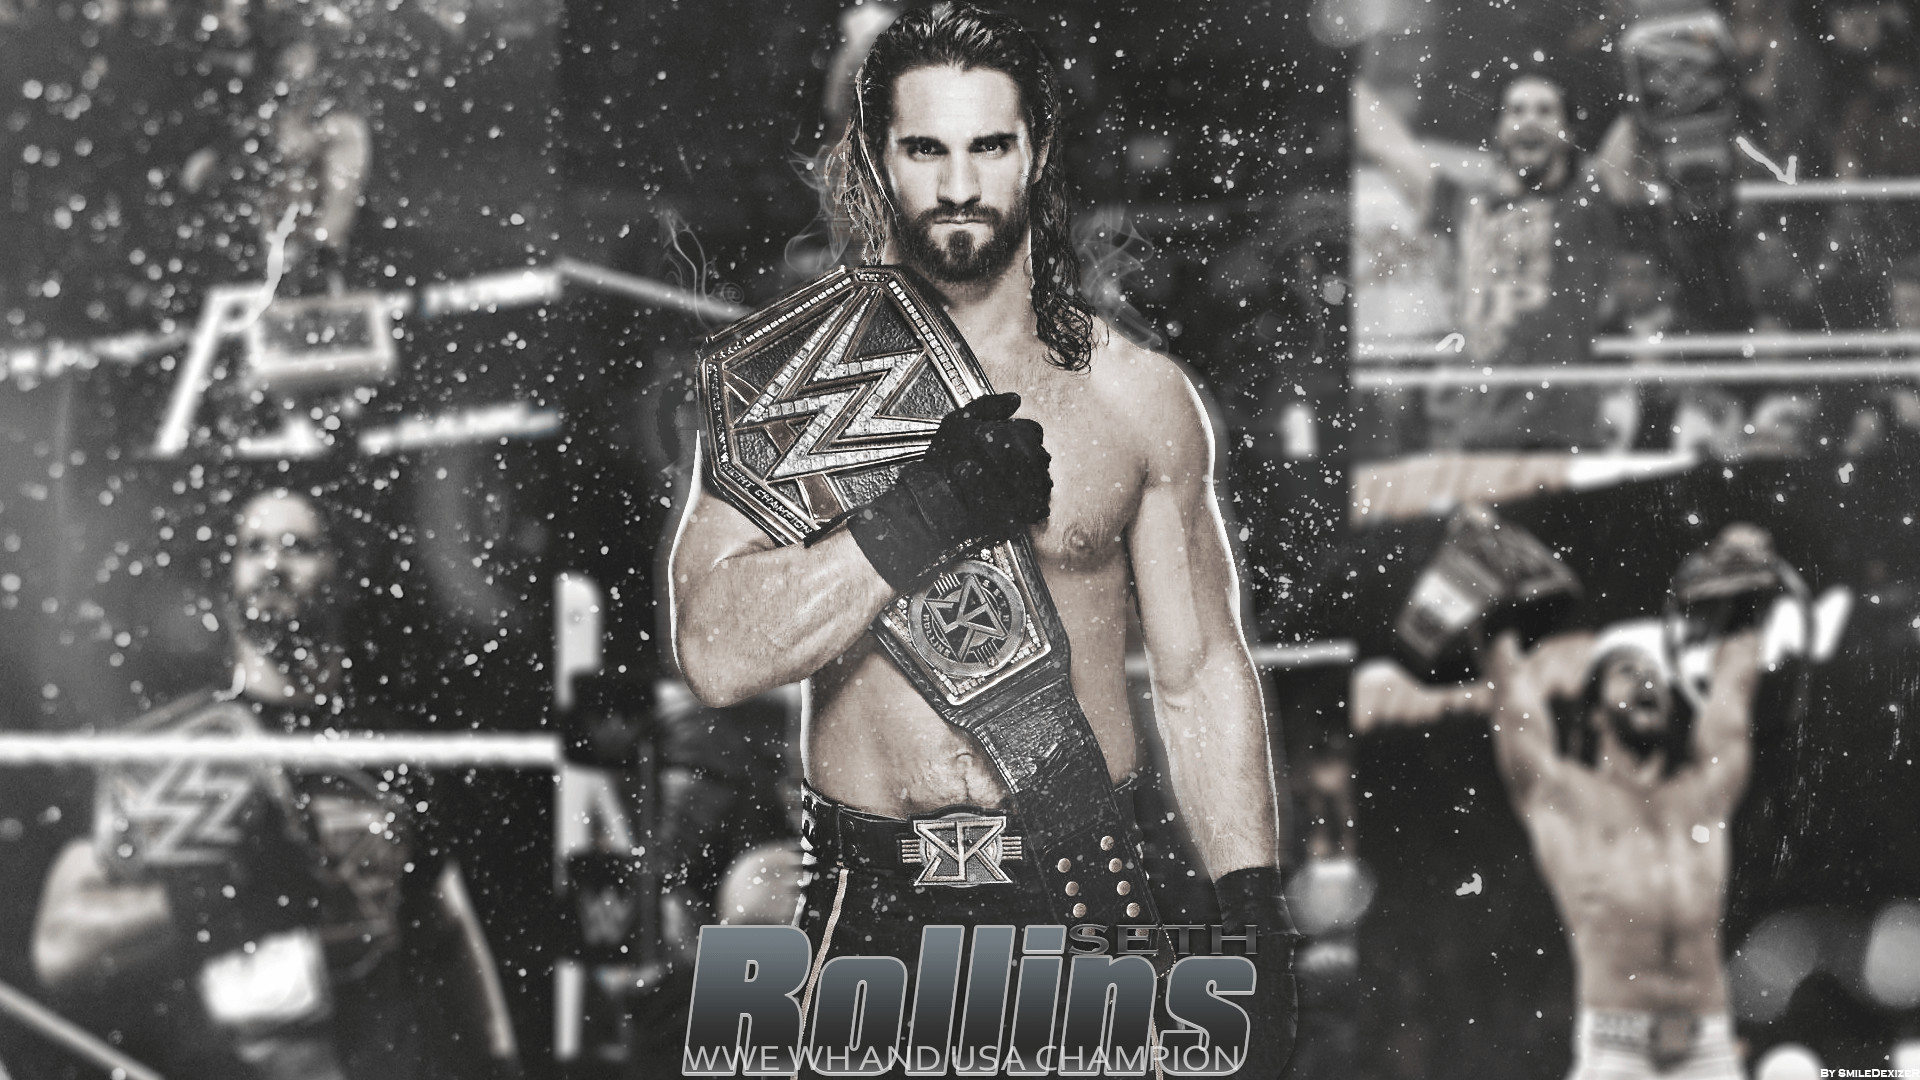 Seth Rollins Wallpapers Top Beautiful Seth Rollins Images 215 1920x1080